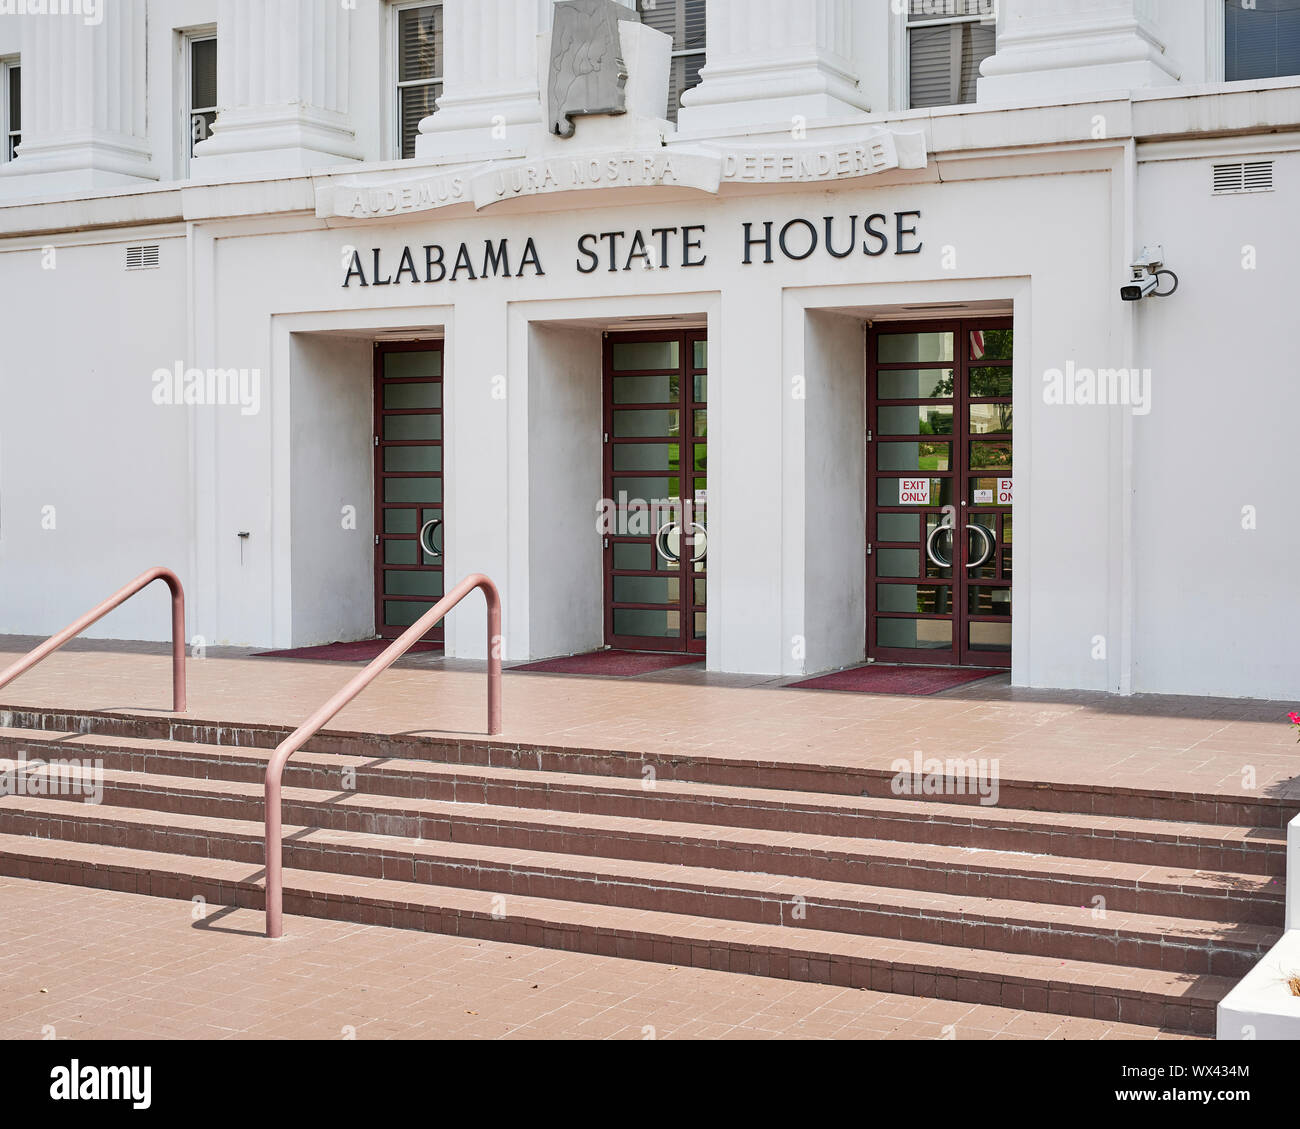 Alabama State House front exterior entrance, a government building, in Montgomery Alabama, USA. Stock Photo